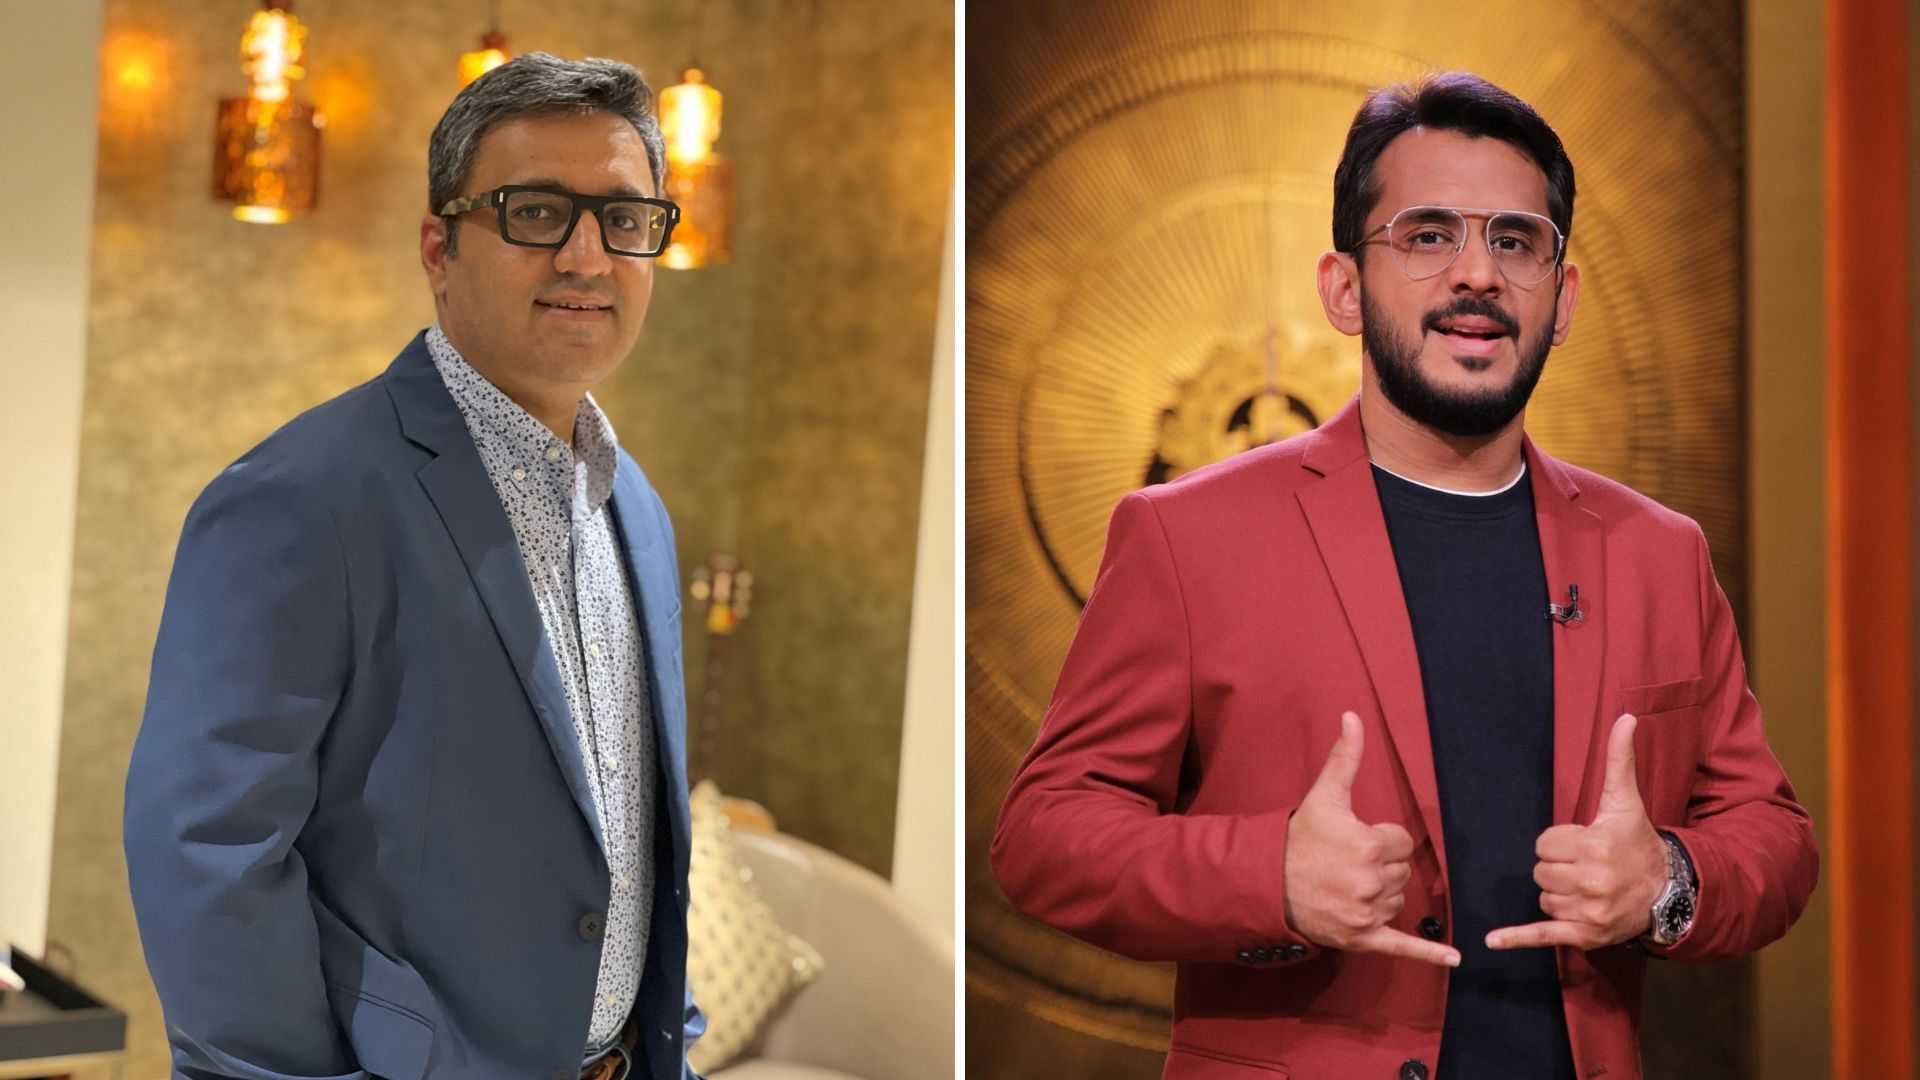 Shark Tank India fame Ashneer Grover poses with Aman Gupta days after unfollowing him on social media, netizens react